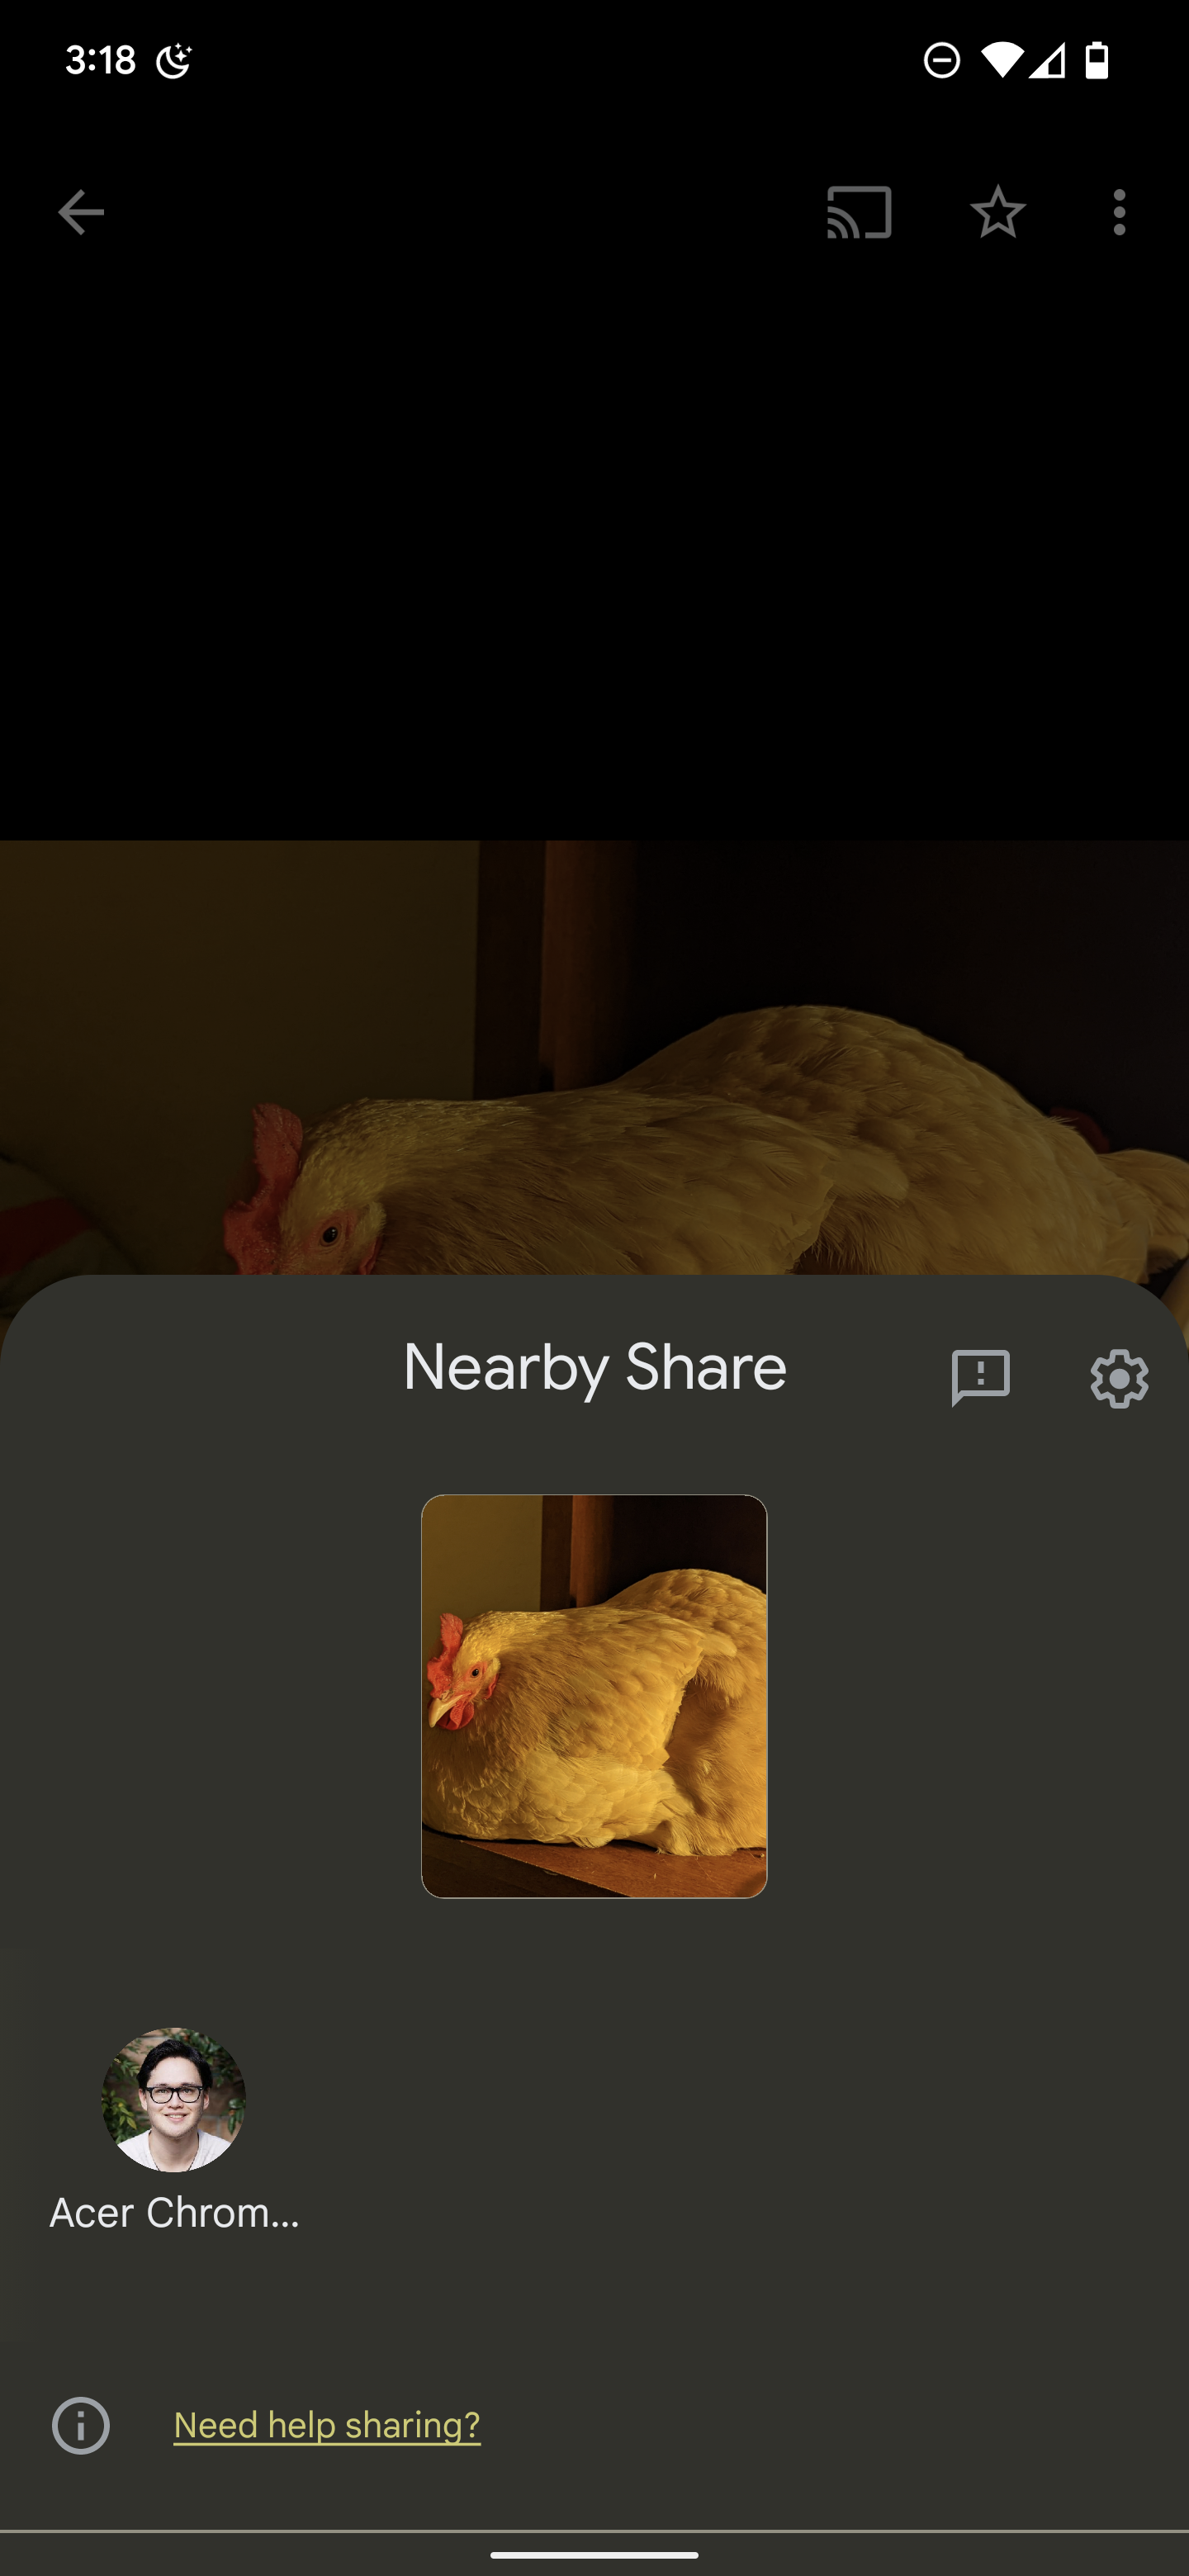 nearby share options in google photos